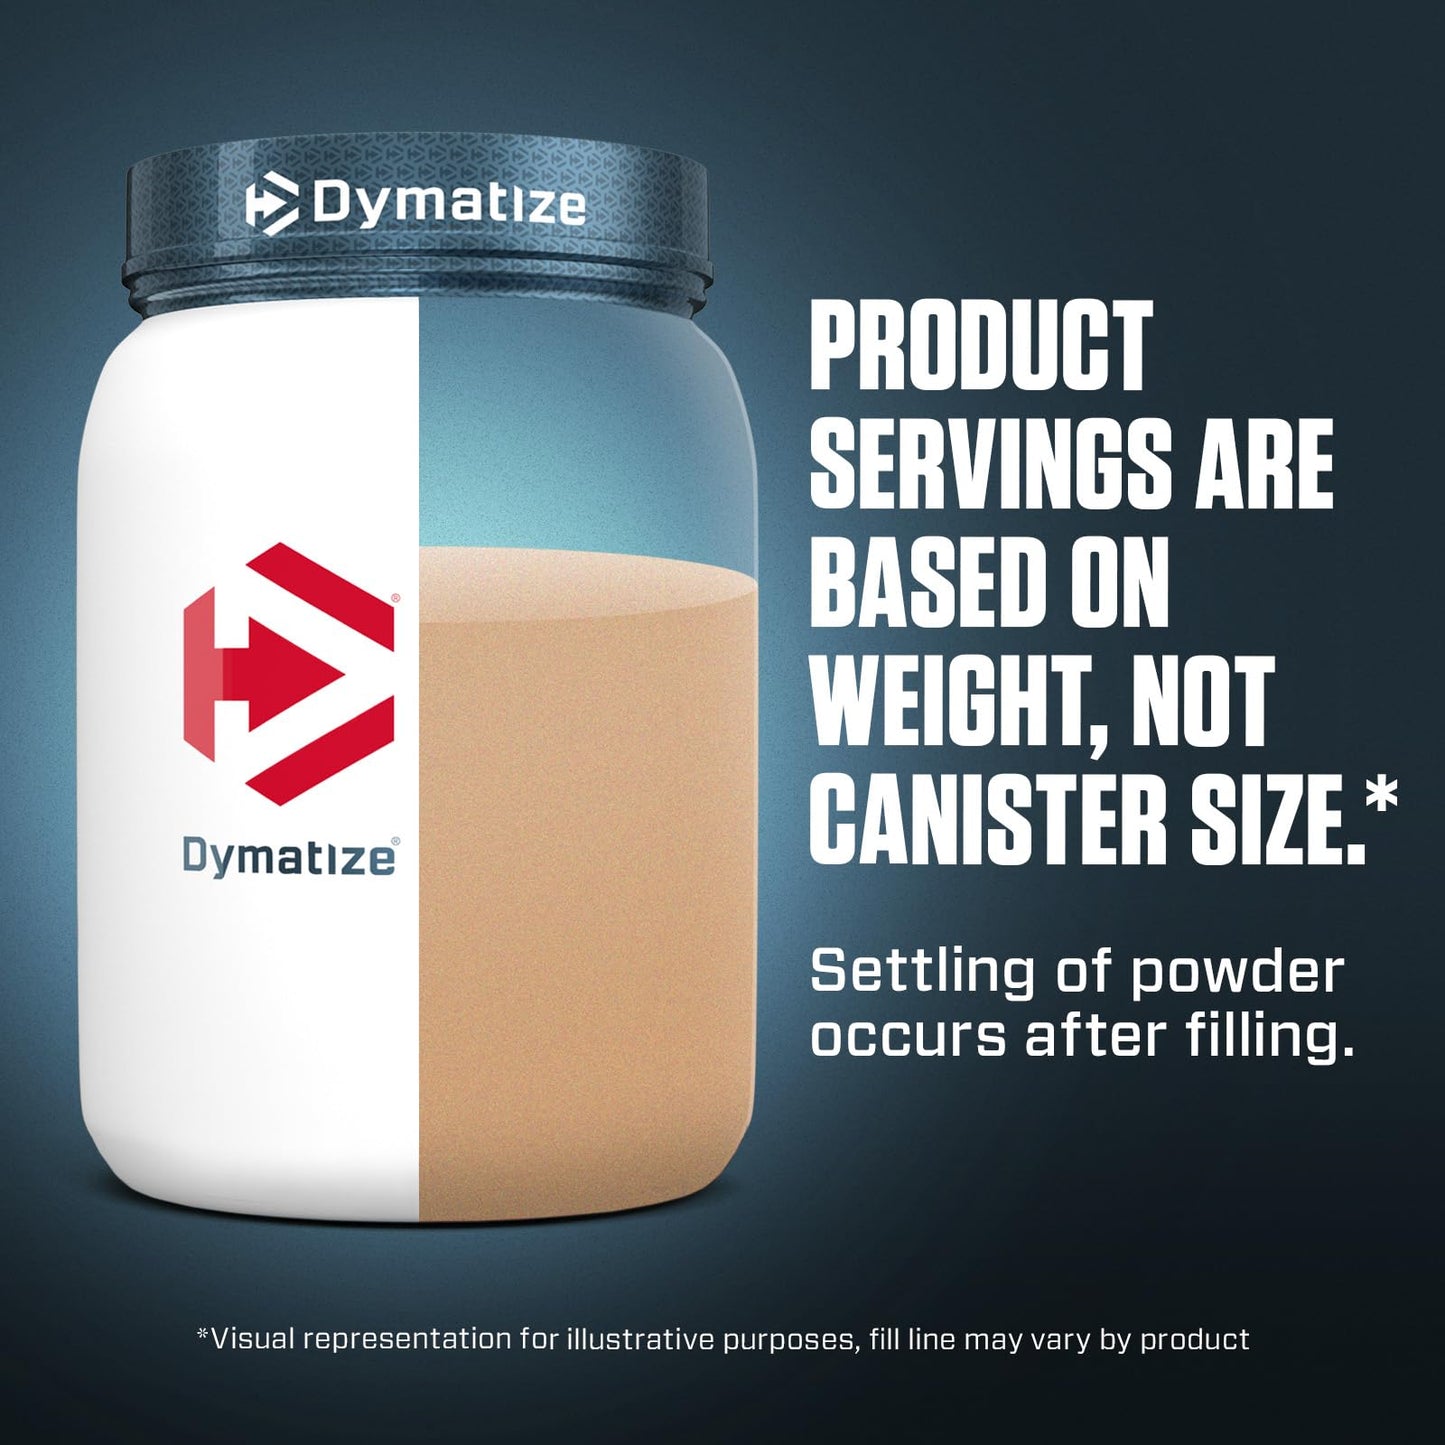 Dymatize ISO100 Hydrolyzed Protein Powder, 100% Whey Isolate , Supplement in Pakistan